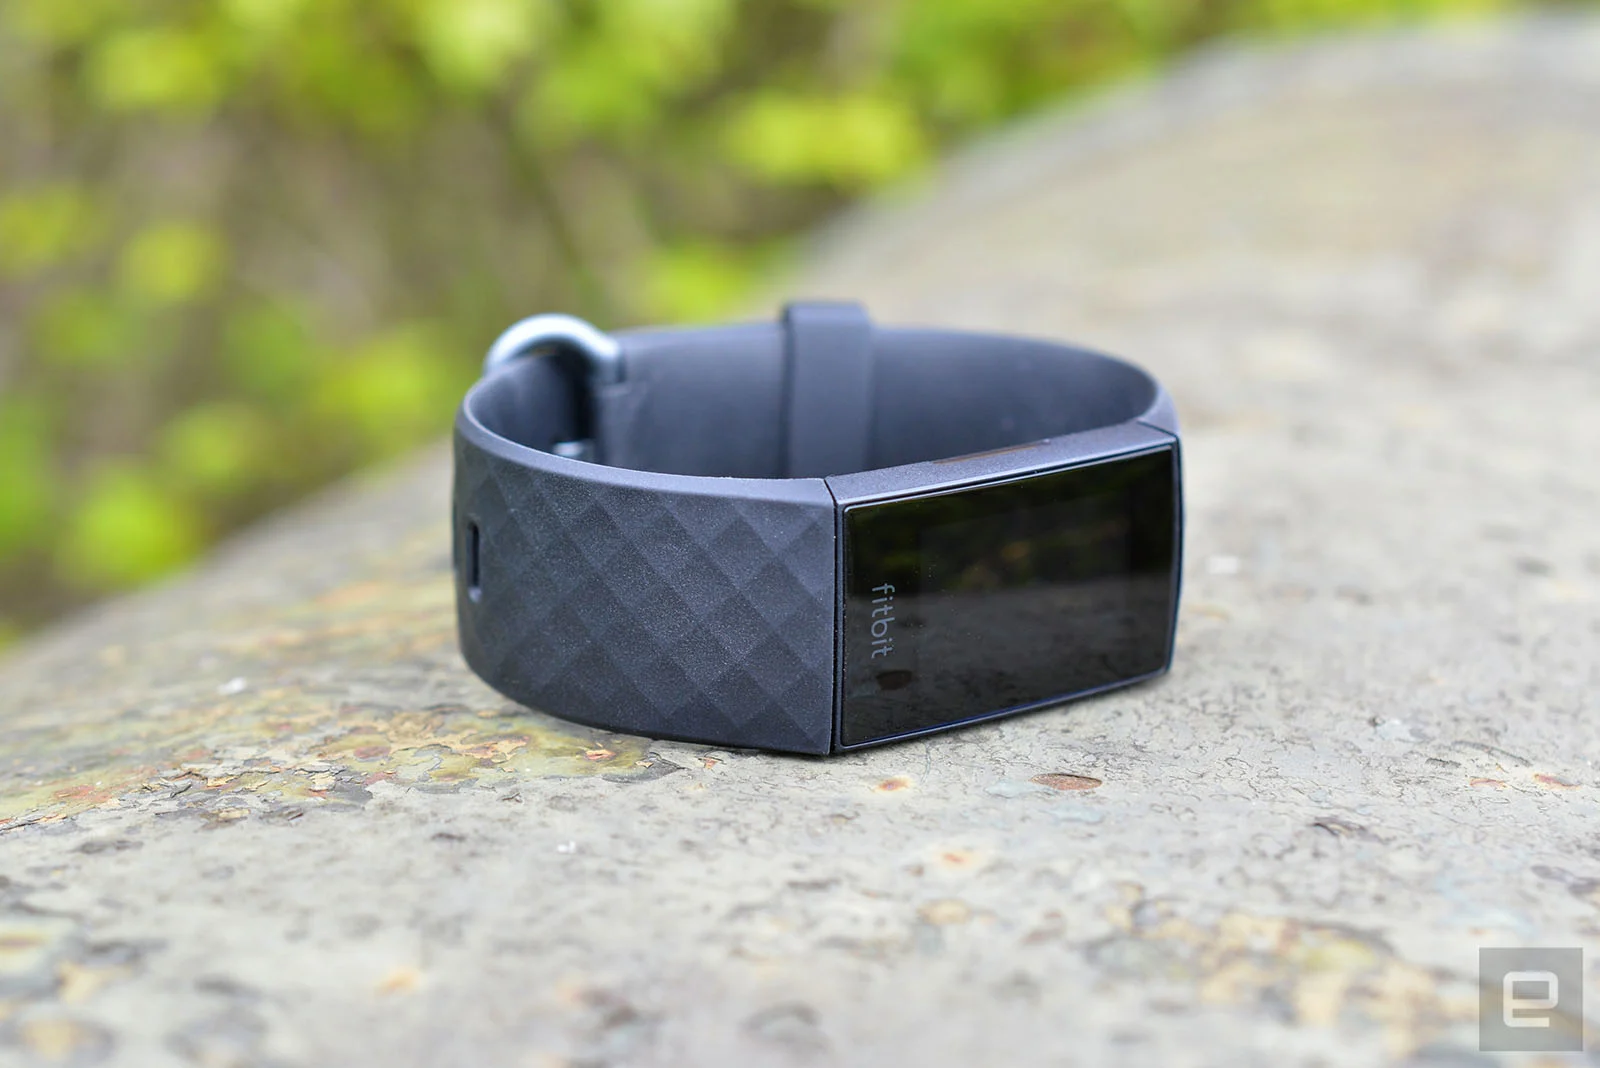 Fitbit Charge 4 fitness tracker.